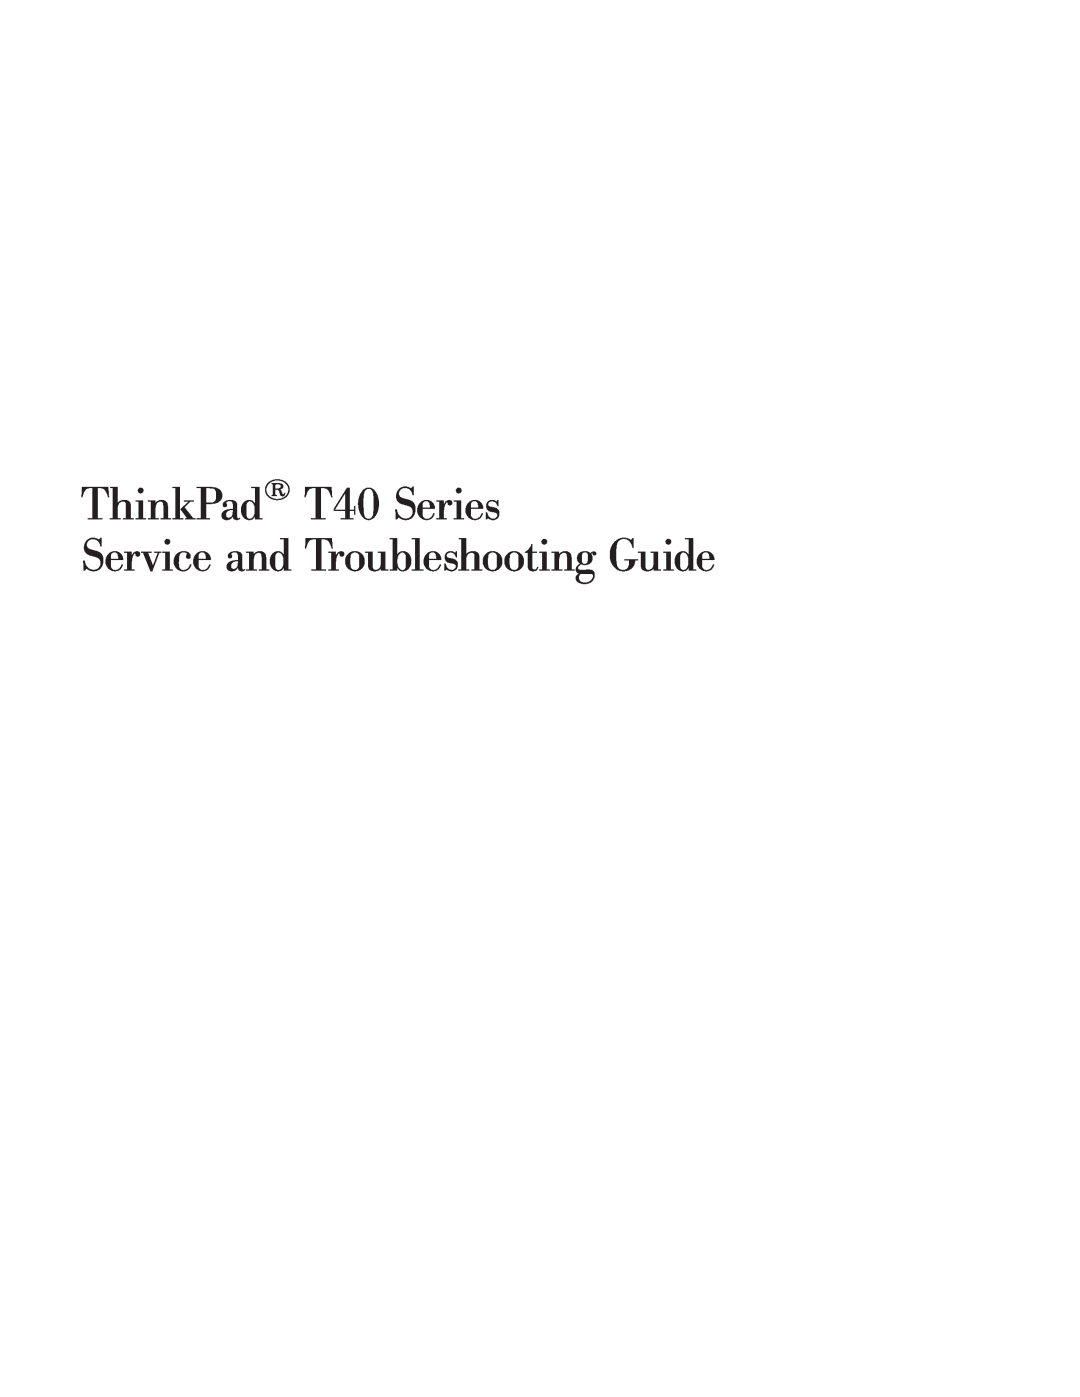 Lenovo manual ThinkPad T40 Series, Service and Troubleshooting Guide 